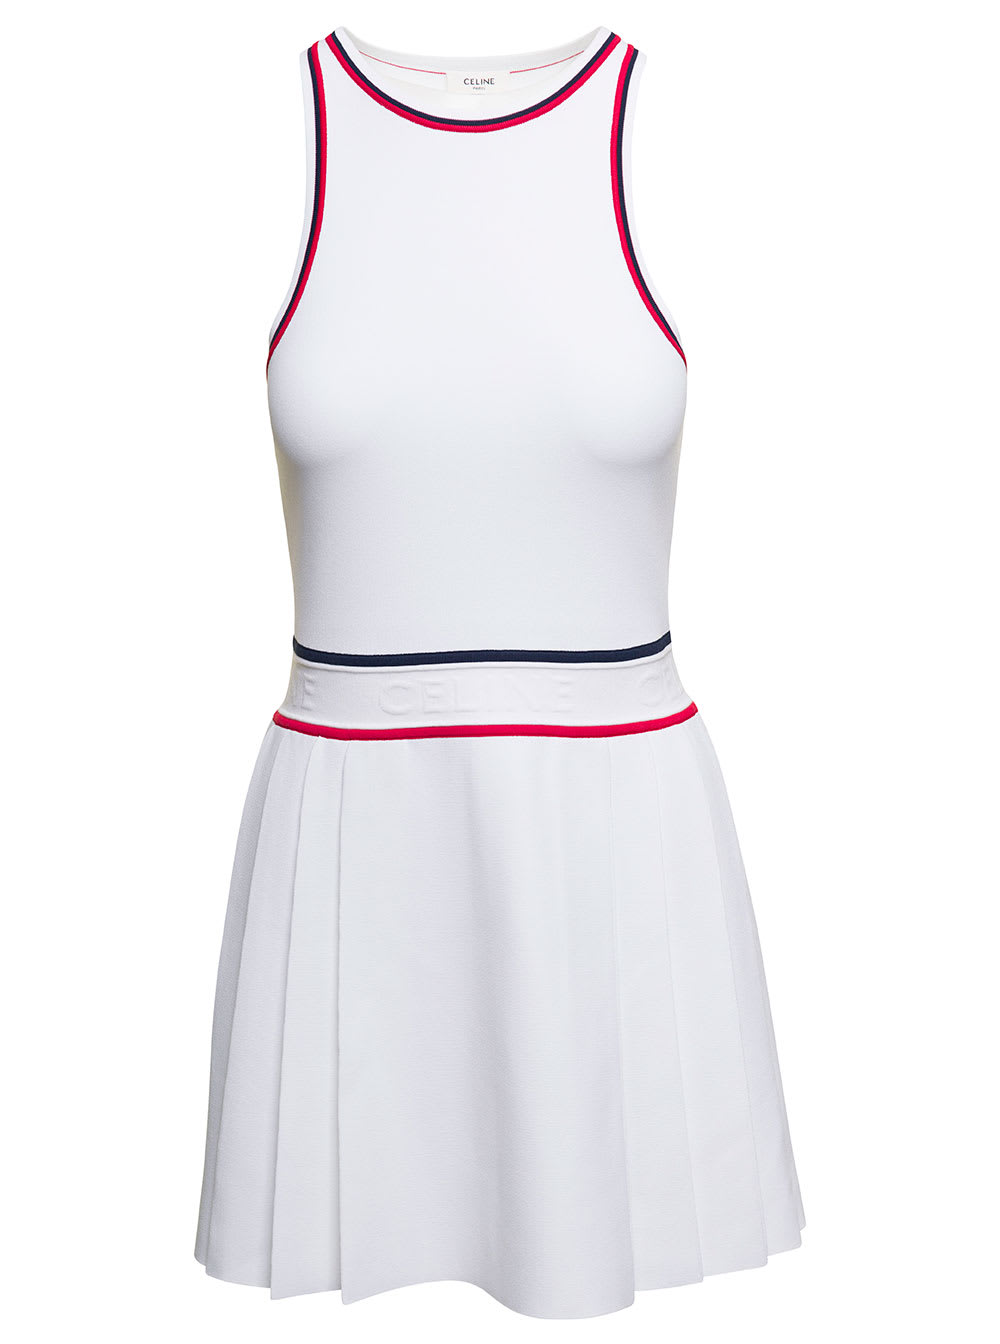 CELINE ATHELETIC SHORT SLEEVELESS DRESS WITH RED AND BLU PROFILES PLEATED SKIRT WHITE IN VISCOSE WOMAN